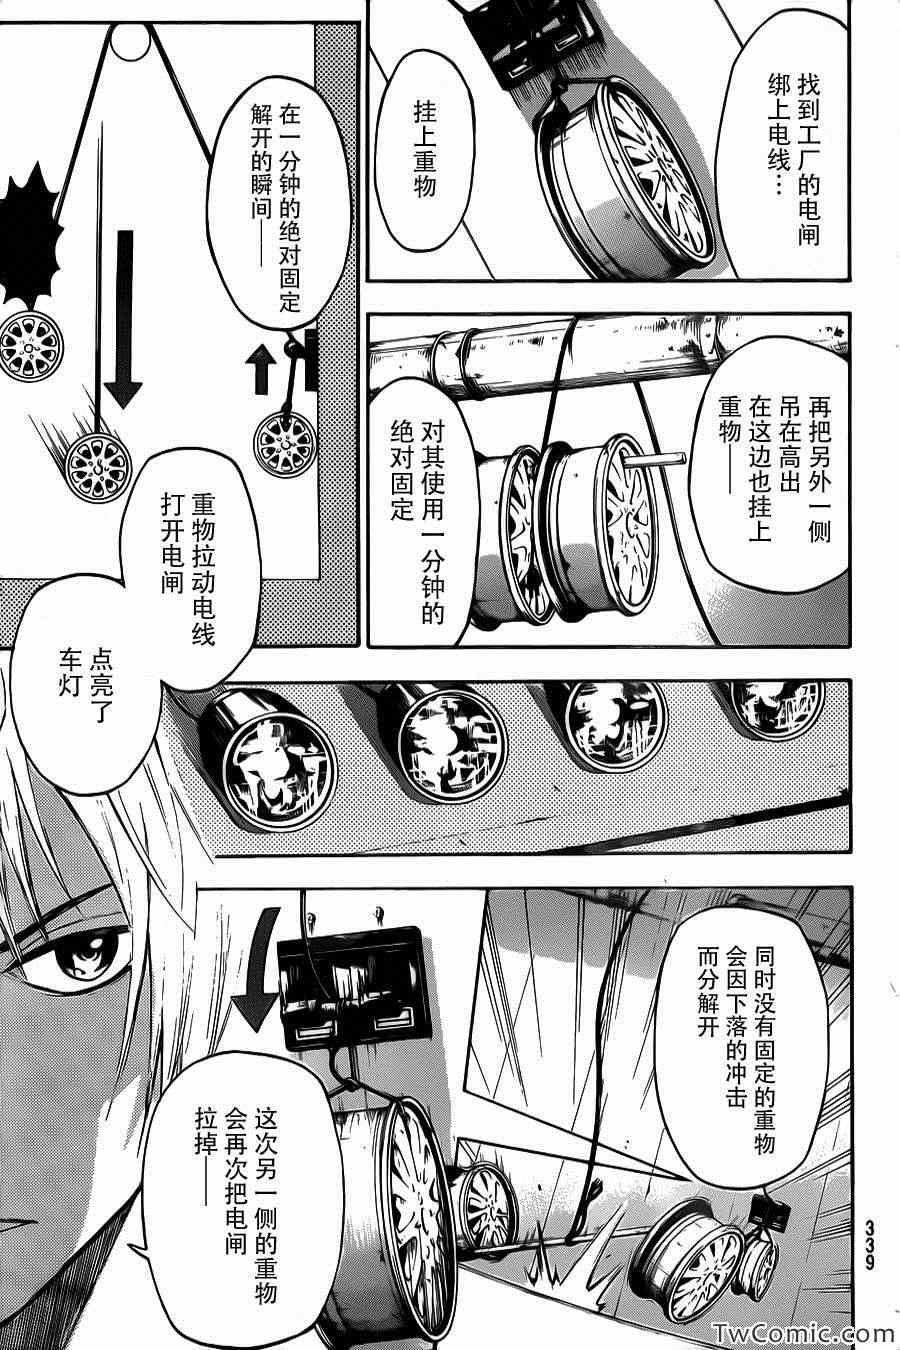 《Acma Game》漫画 AcmaGame 013集